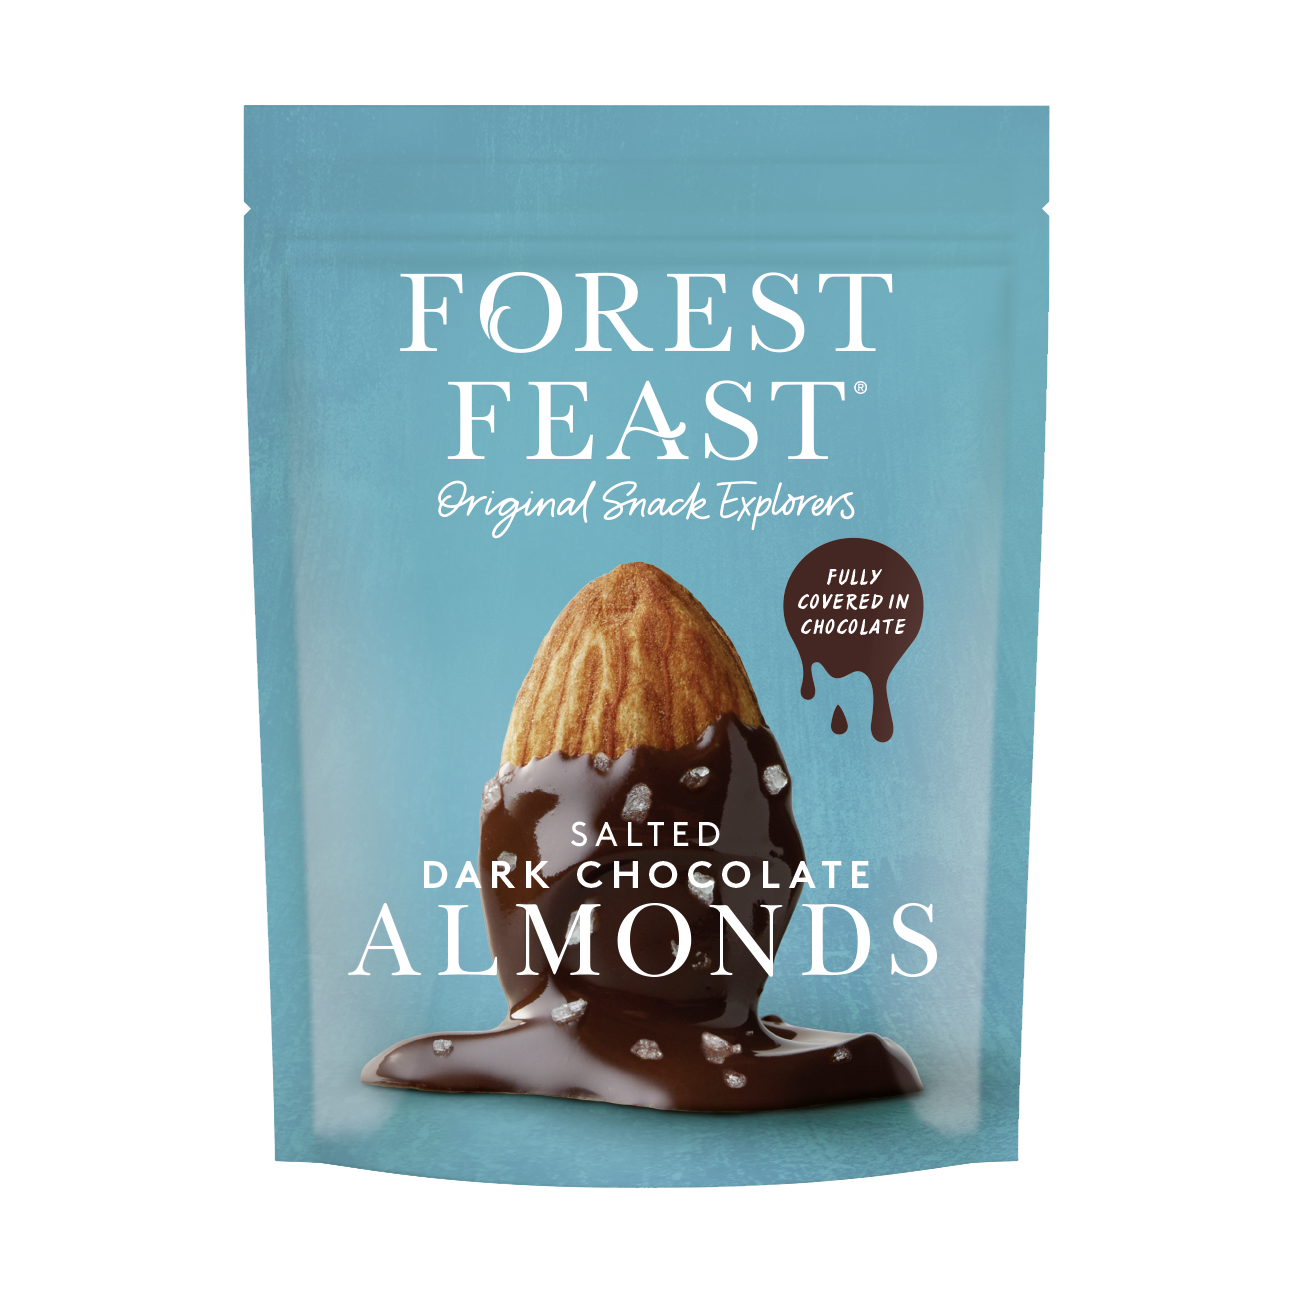 Forest Feast taps into demand for premium snacking